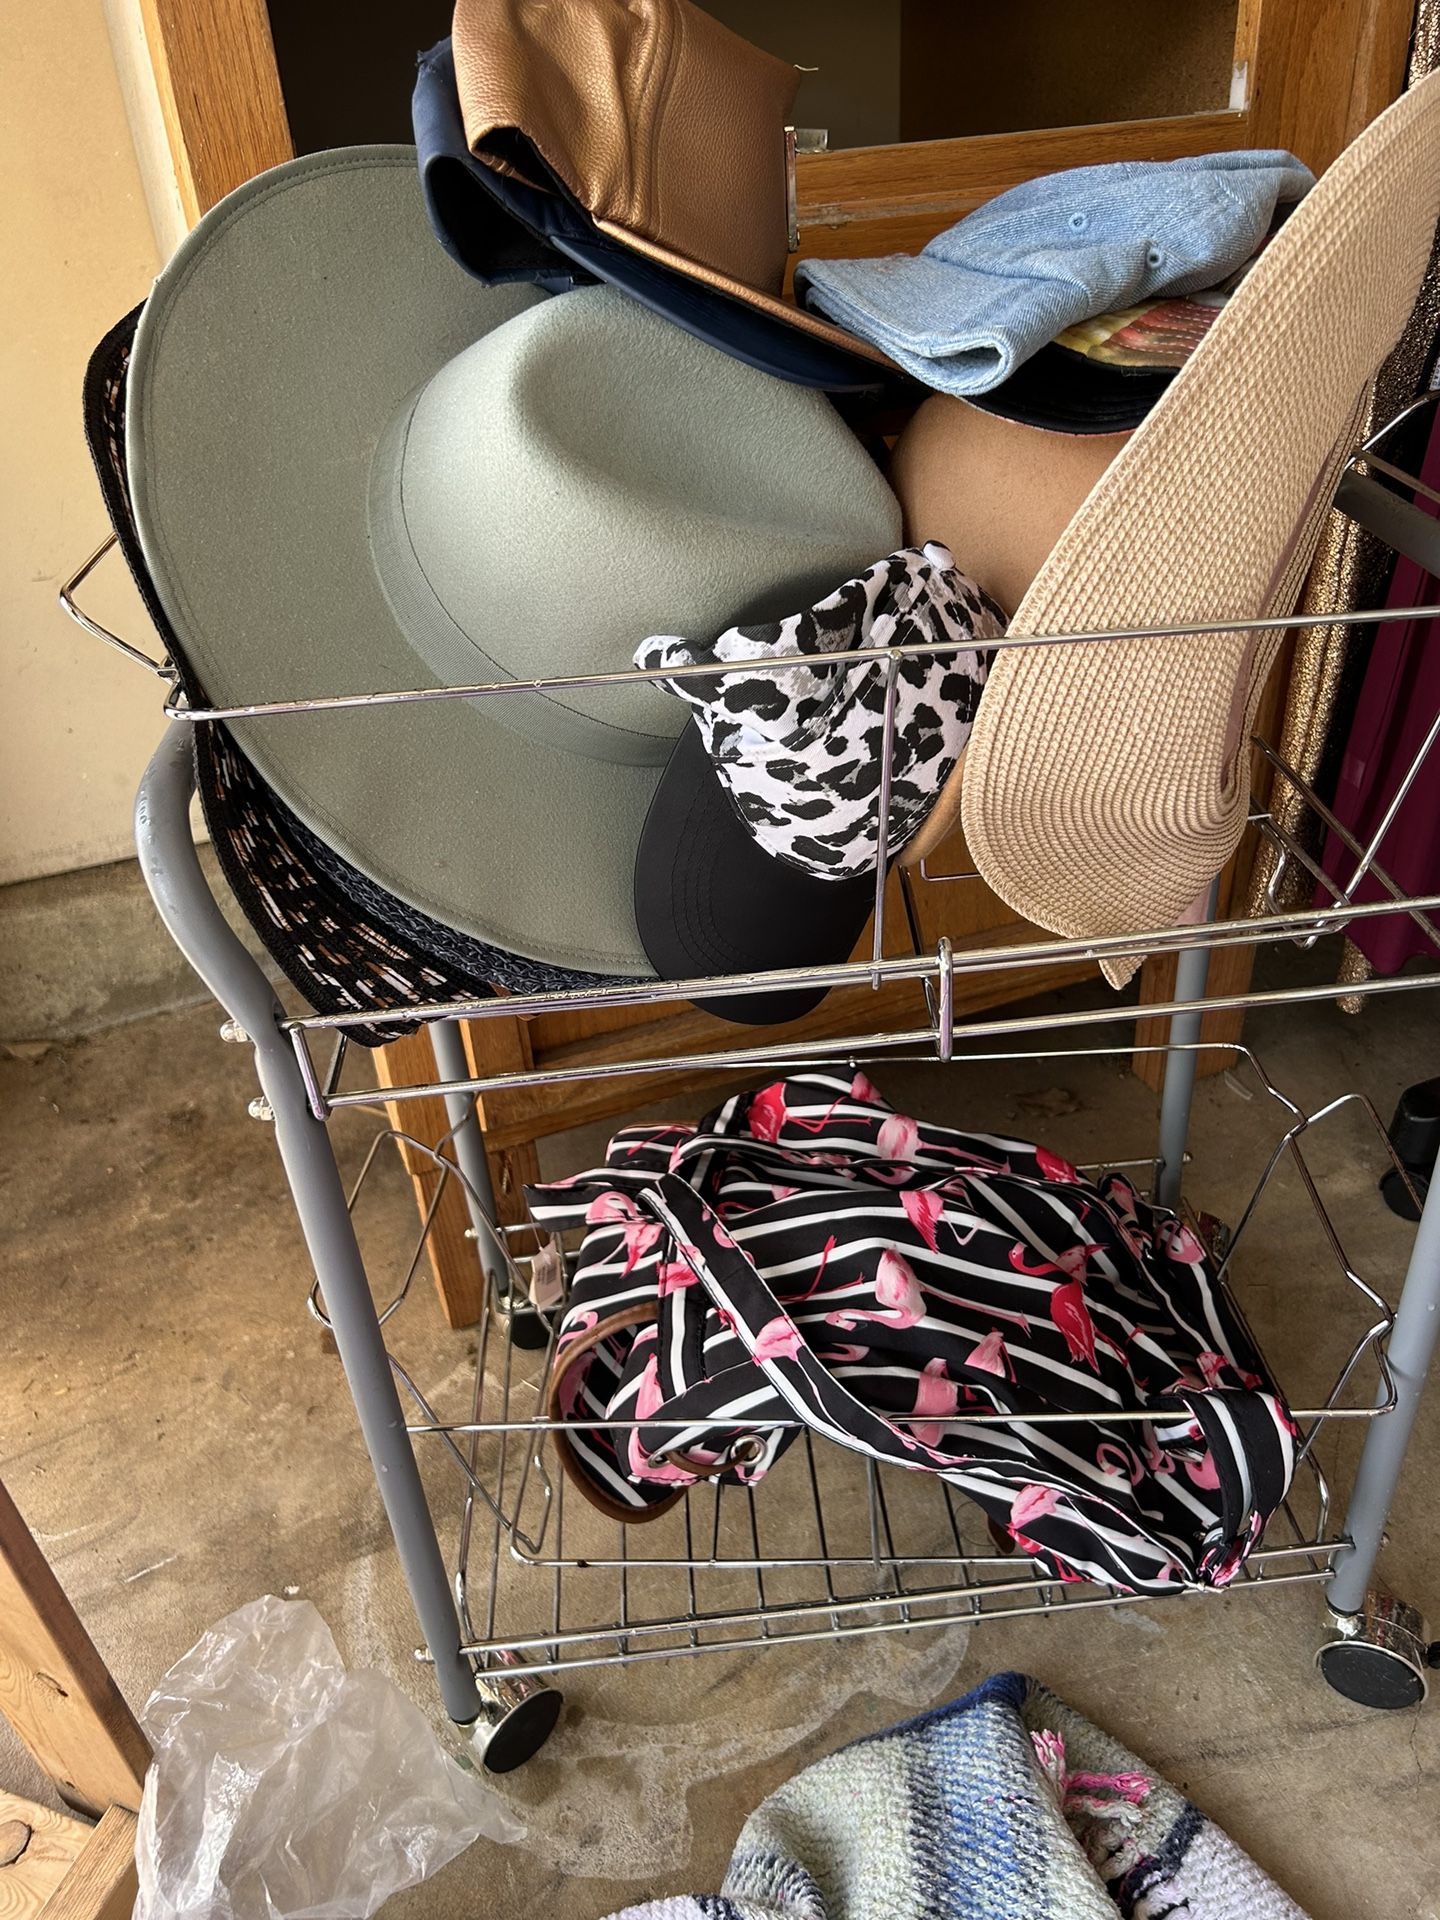 Accessory Rolling Rack With Hats & Backpack